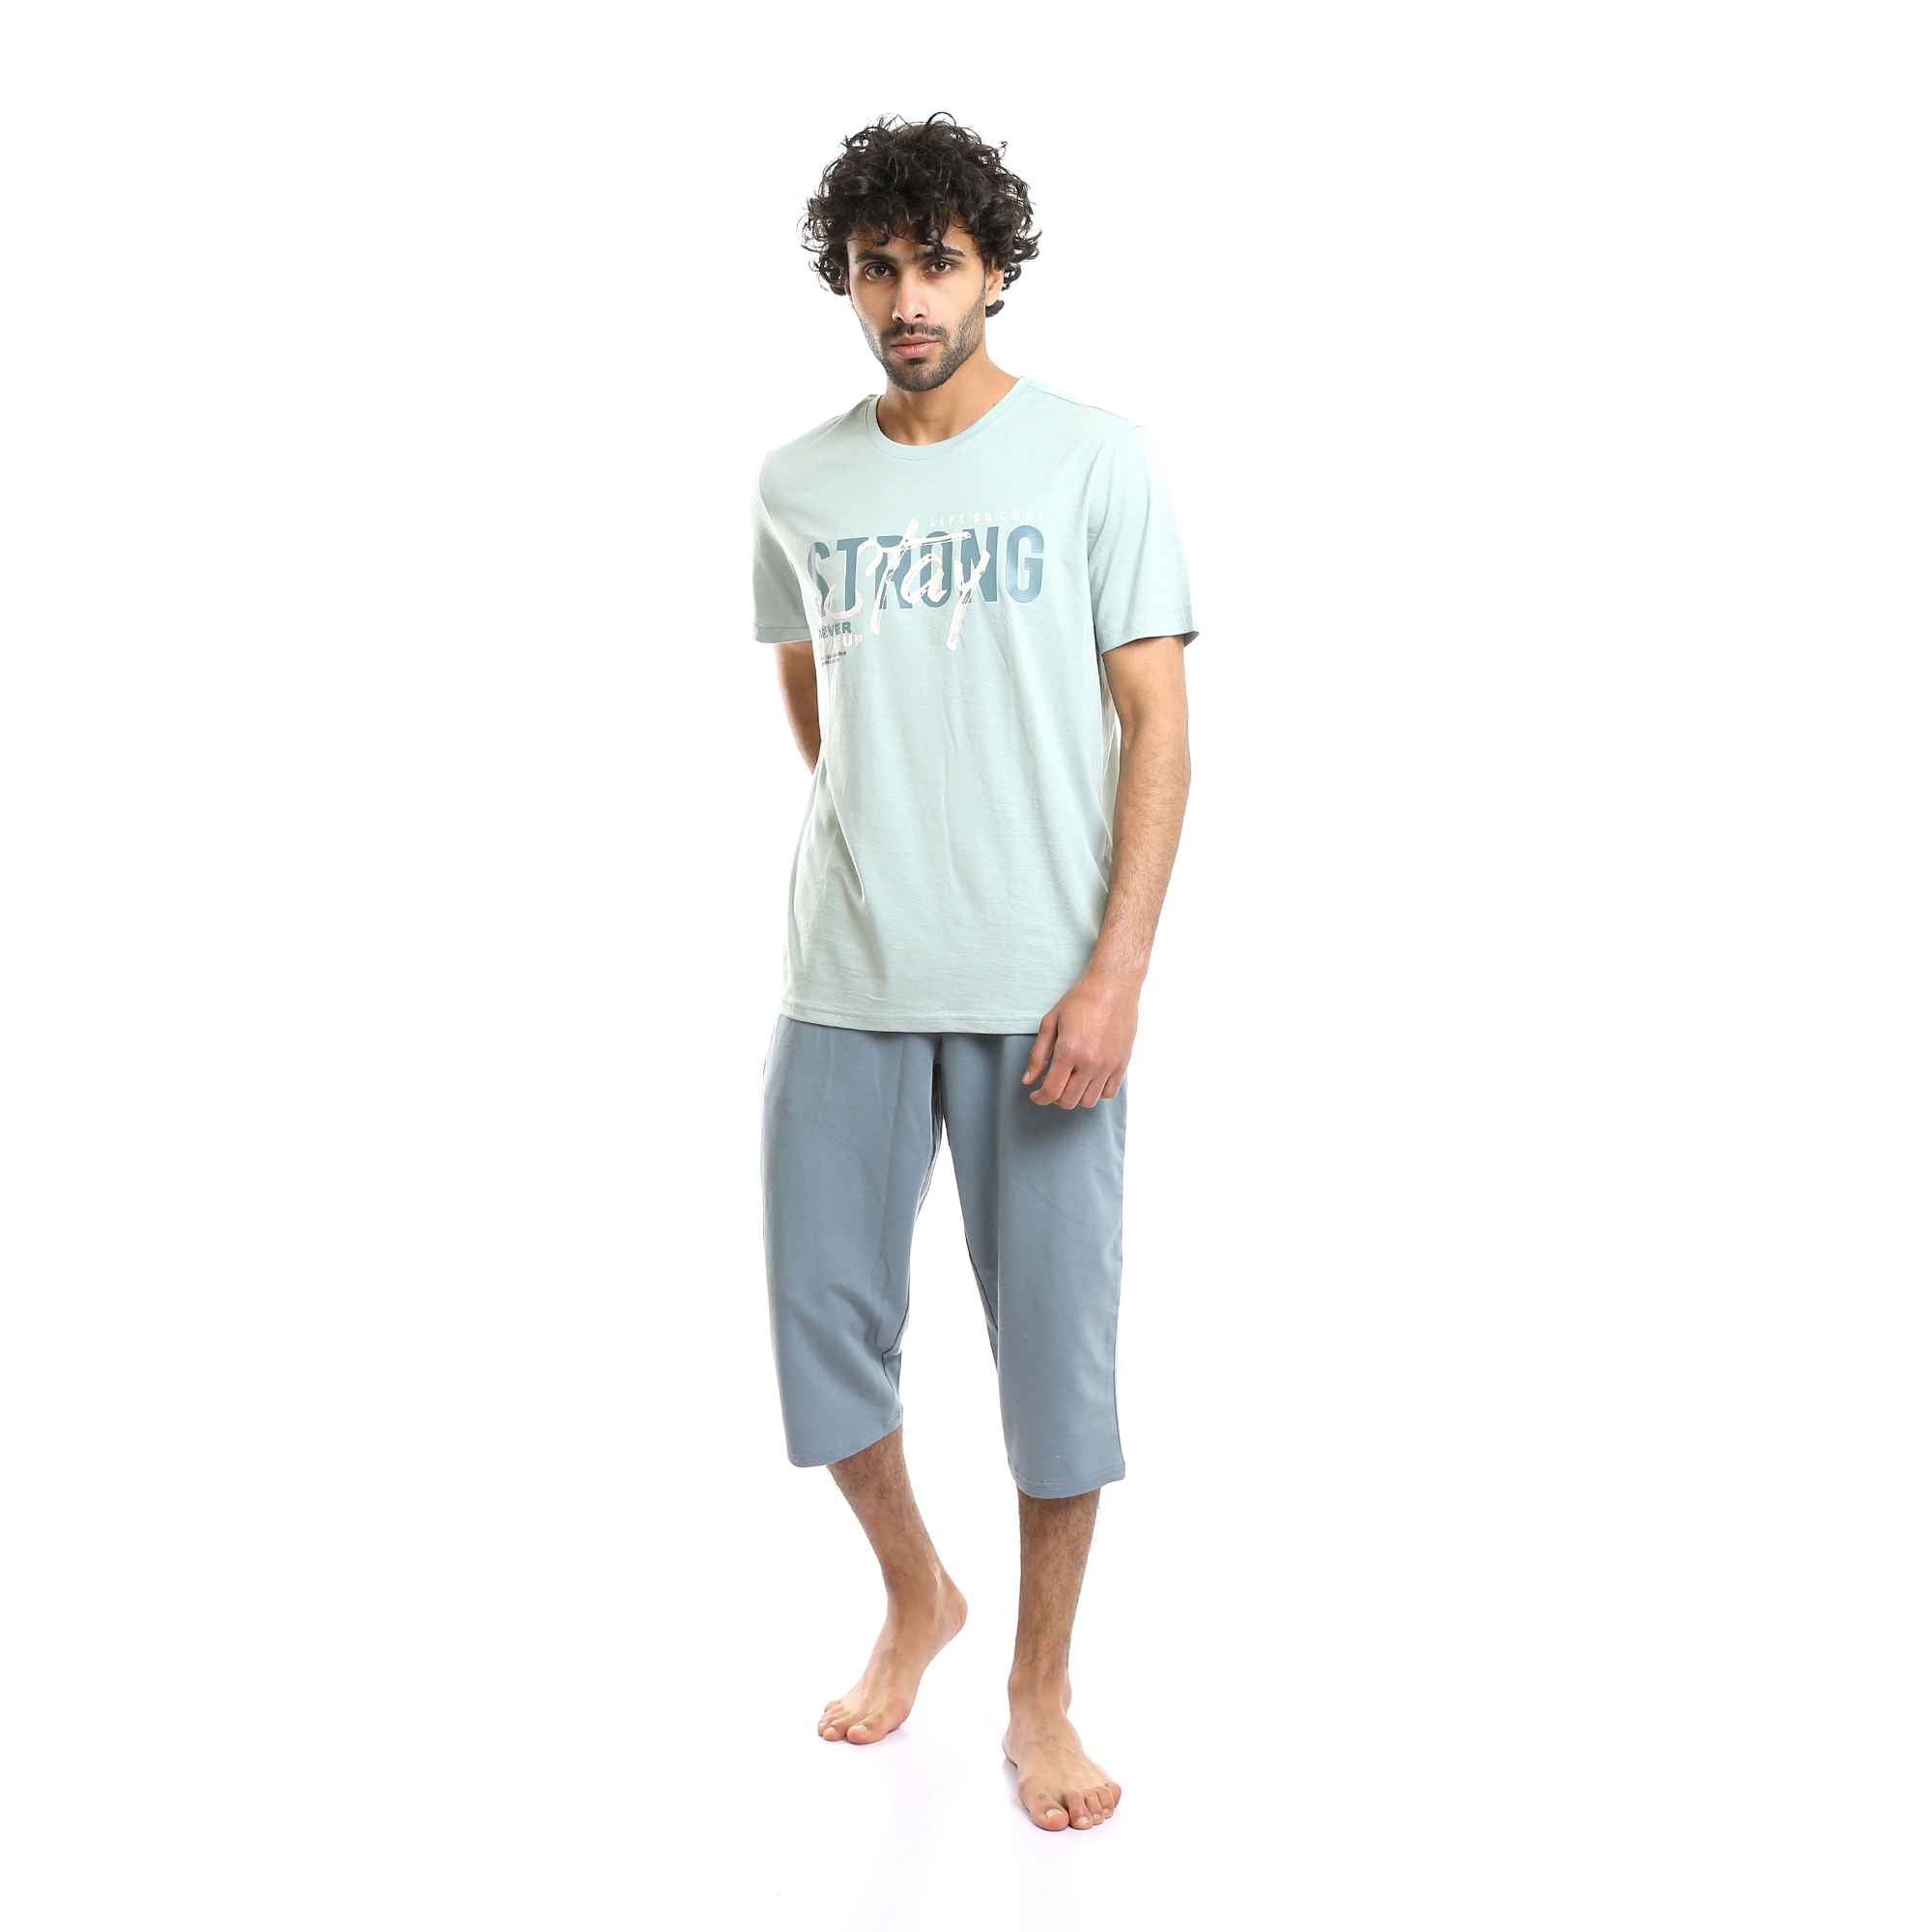 "Stay Strong" Short Sleeves Tee & Solid Pants Pajama Set - Multicolour